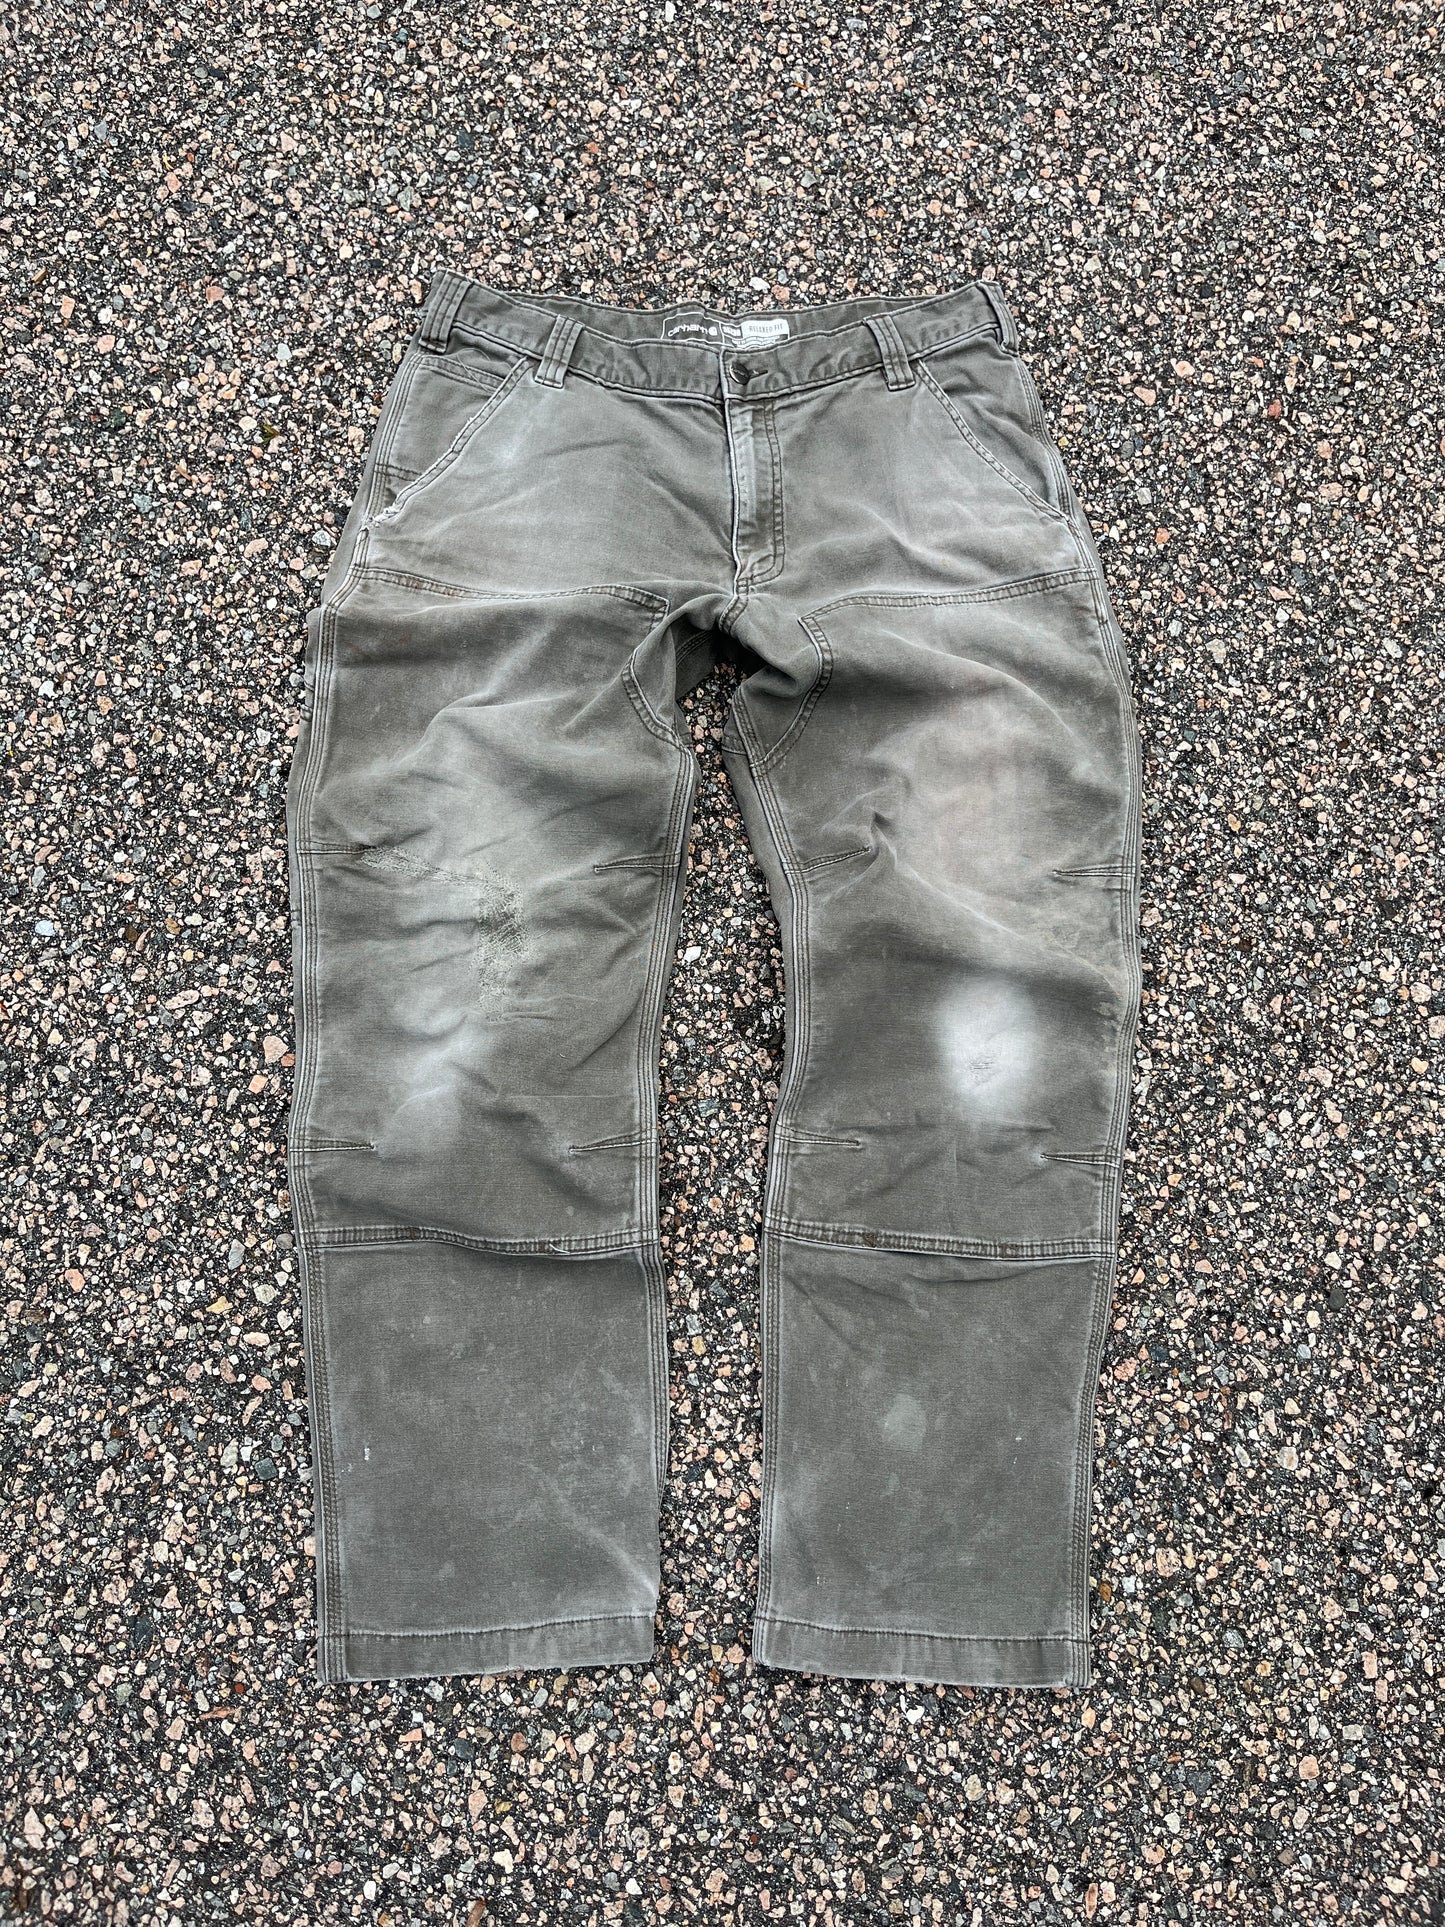 Faded Olive Green Carhartt Double Knee Pants - 33 x 28